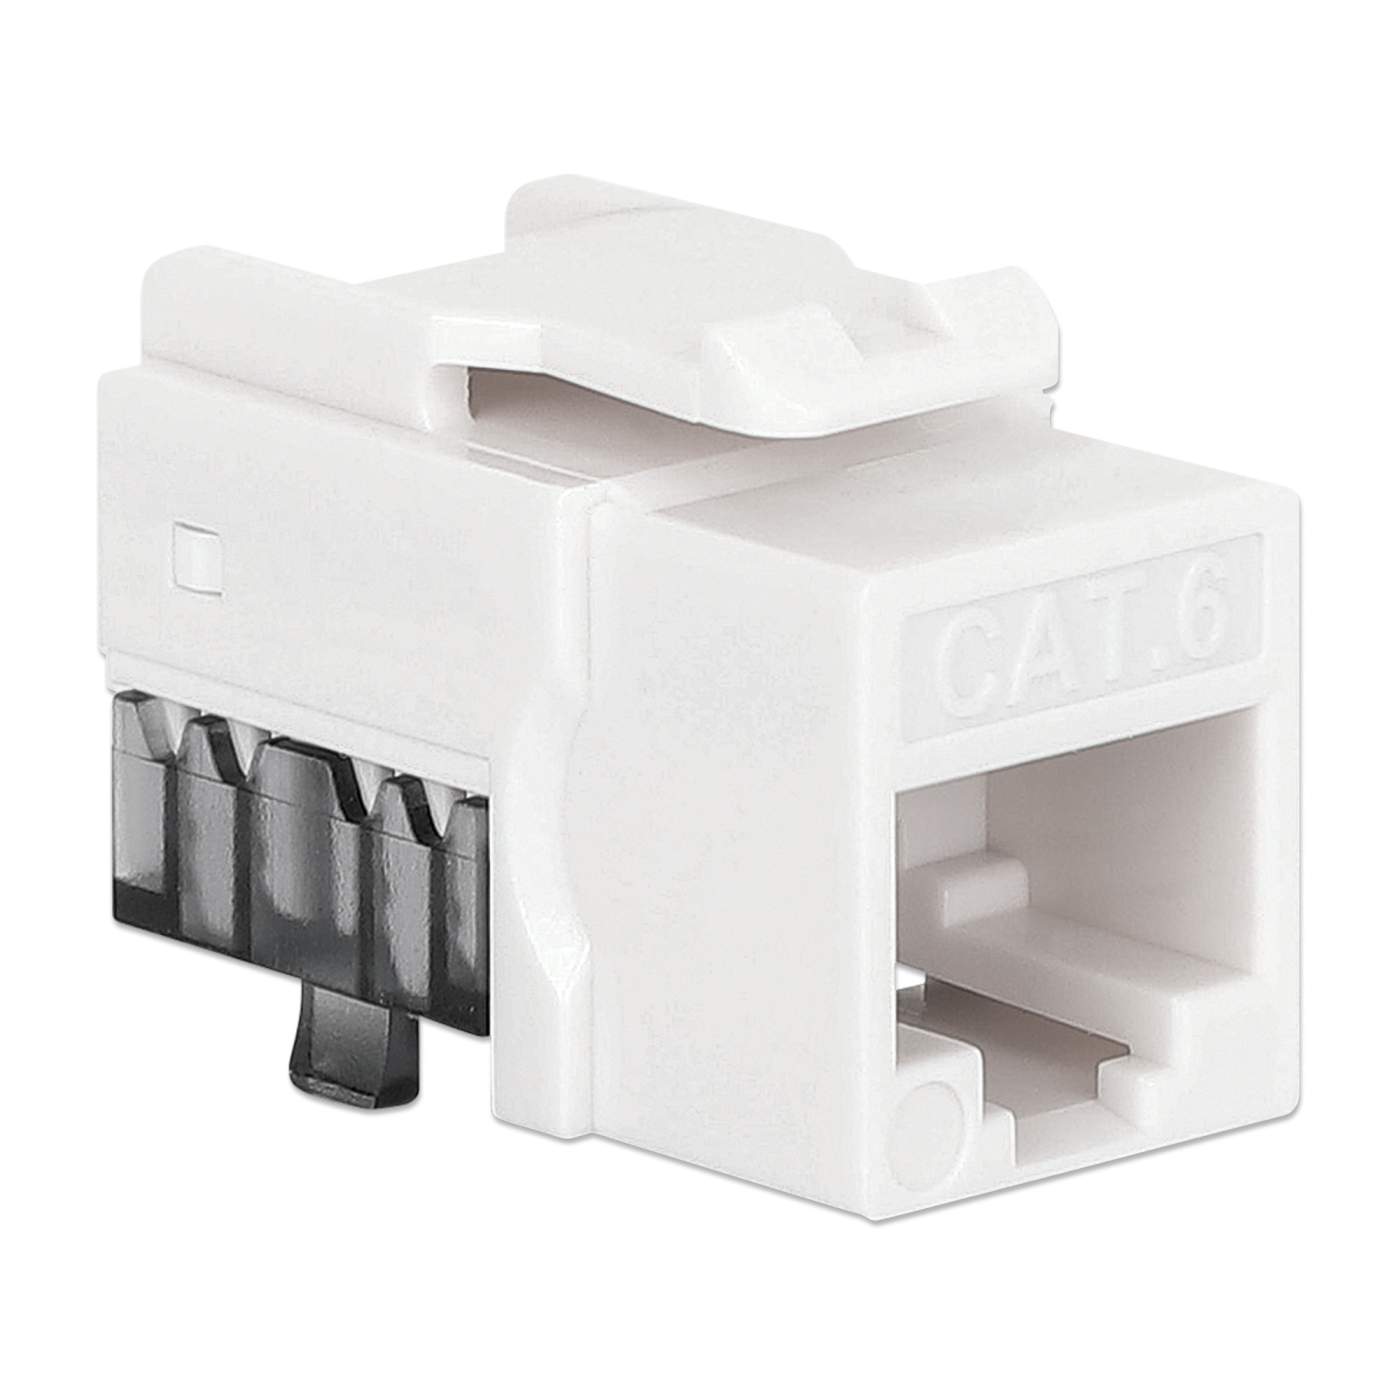 Cat6 Slim Keystone Jack with Punch-Down Stand, White, 25-Pack Image 3